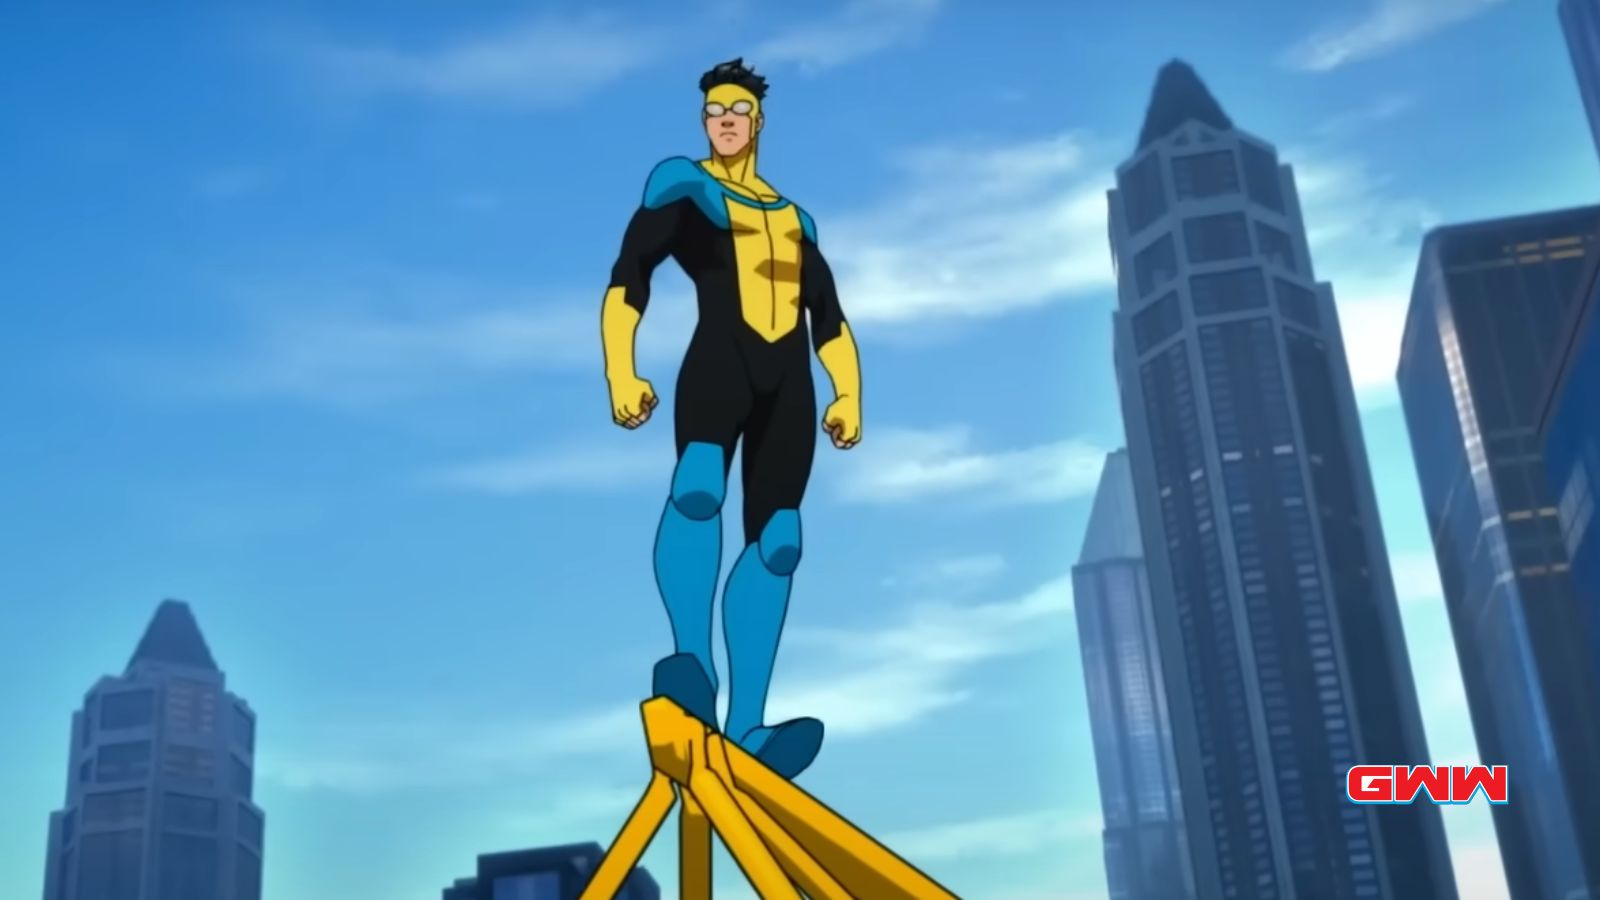 Invincible Superhero in blue and yellow suit standing confidently on a rooftop.